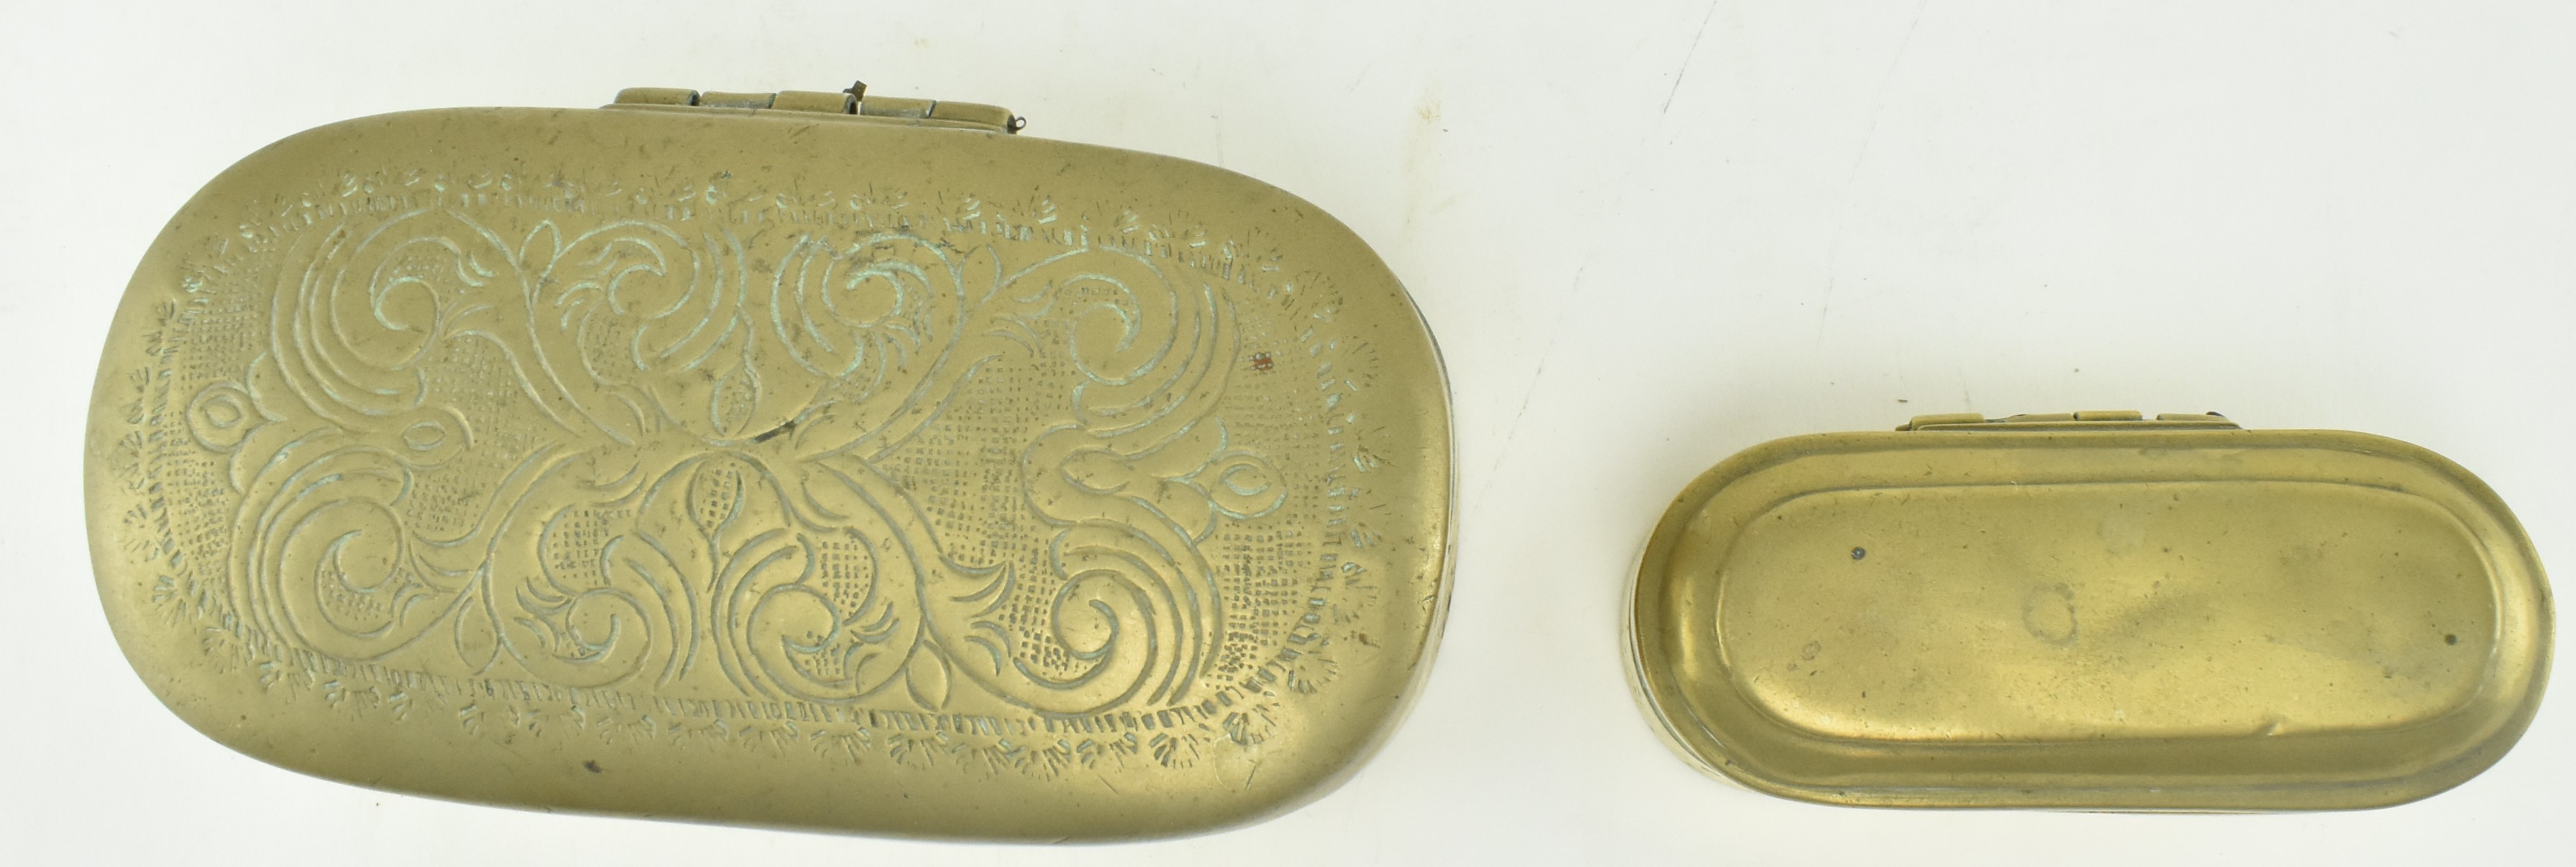 TWO 18TH AND 19TH CENTURY INDIAN BRASS BETEL BOXES - Image 4 of 5